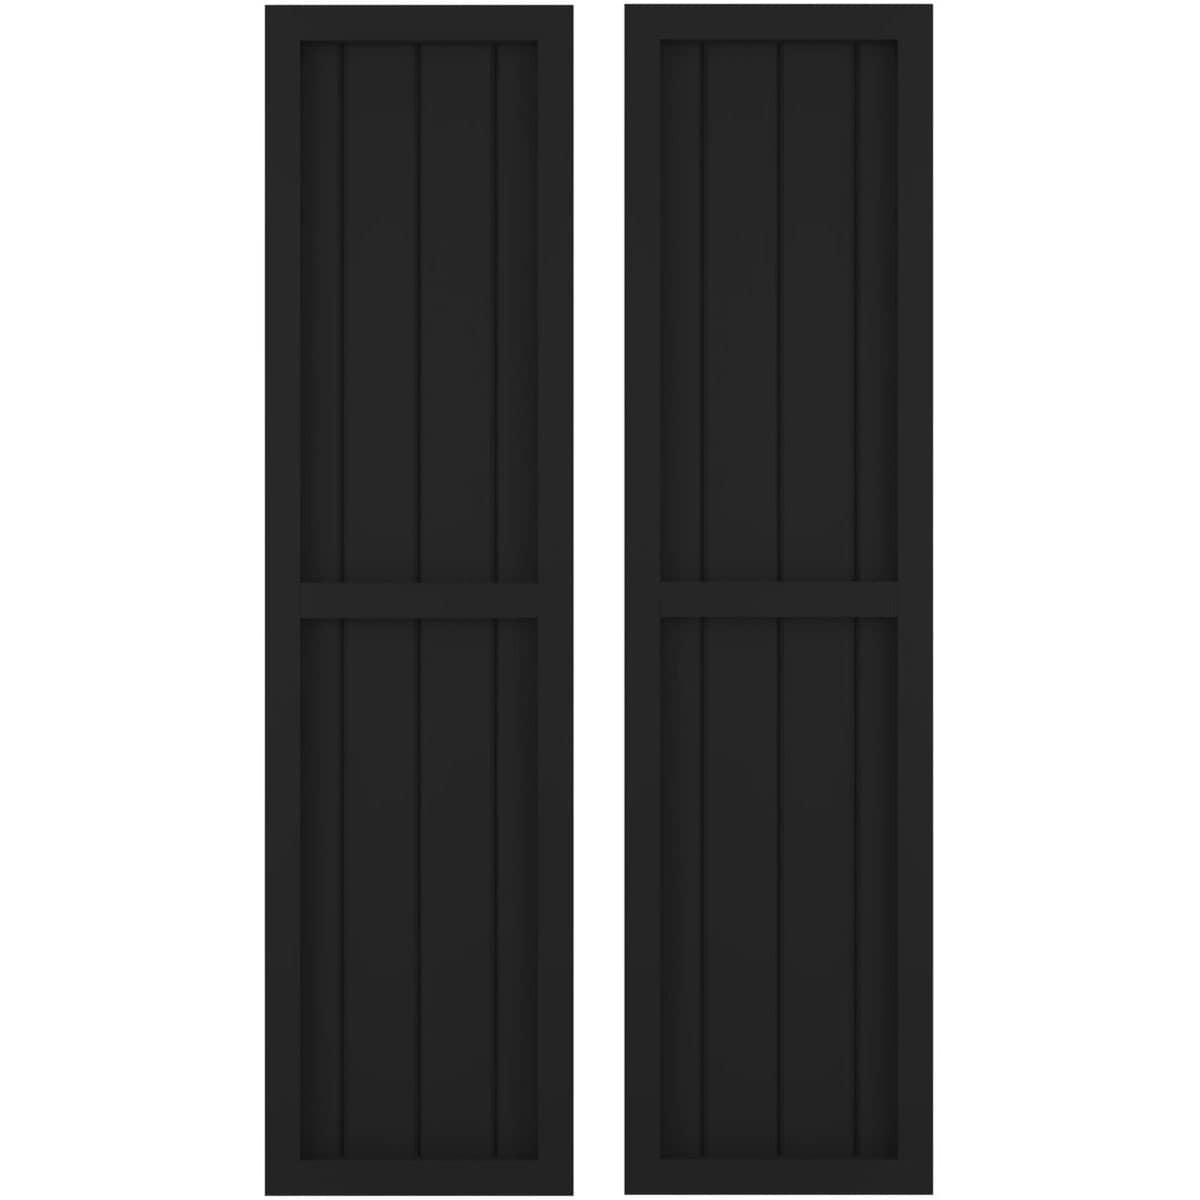 Americraft Exterior Real Wood Two Equal Panel Framed Board-n-Batten Shutters (Per Pair)